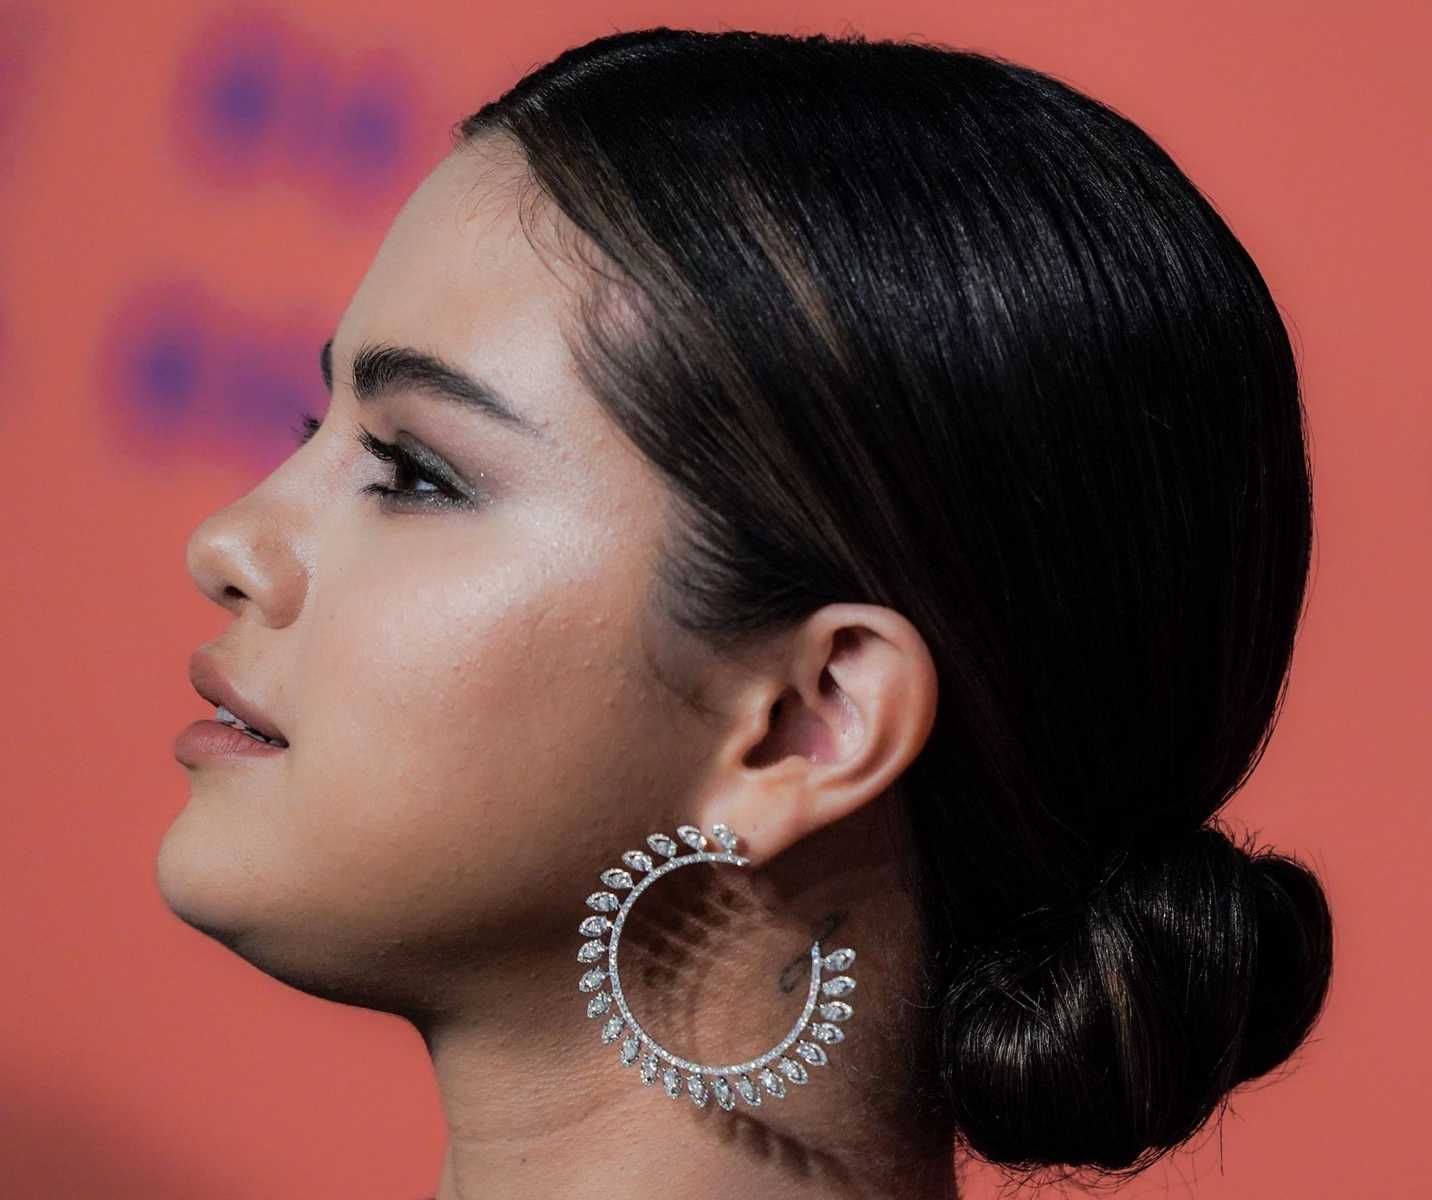 Selena_Gomez_-__The_Dead_Don_t_Die__press_conference_at_the_72nd_edition_of_the_Cannes_Film_Festival_05152019-04.jpg